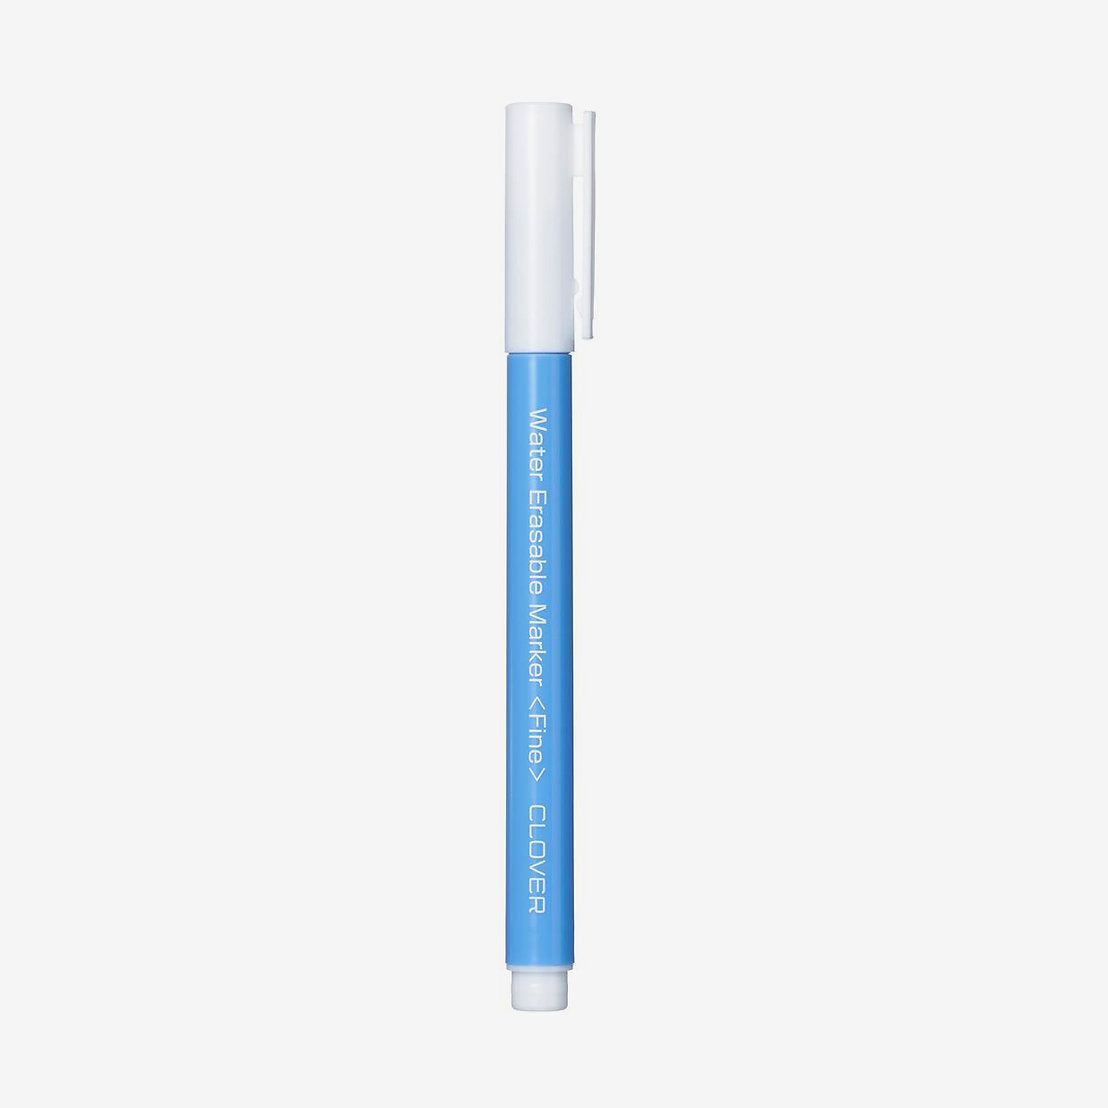 Clover 515 Soluble Marker: Precise Lines and Easy Erasing on Fabrics